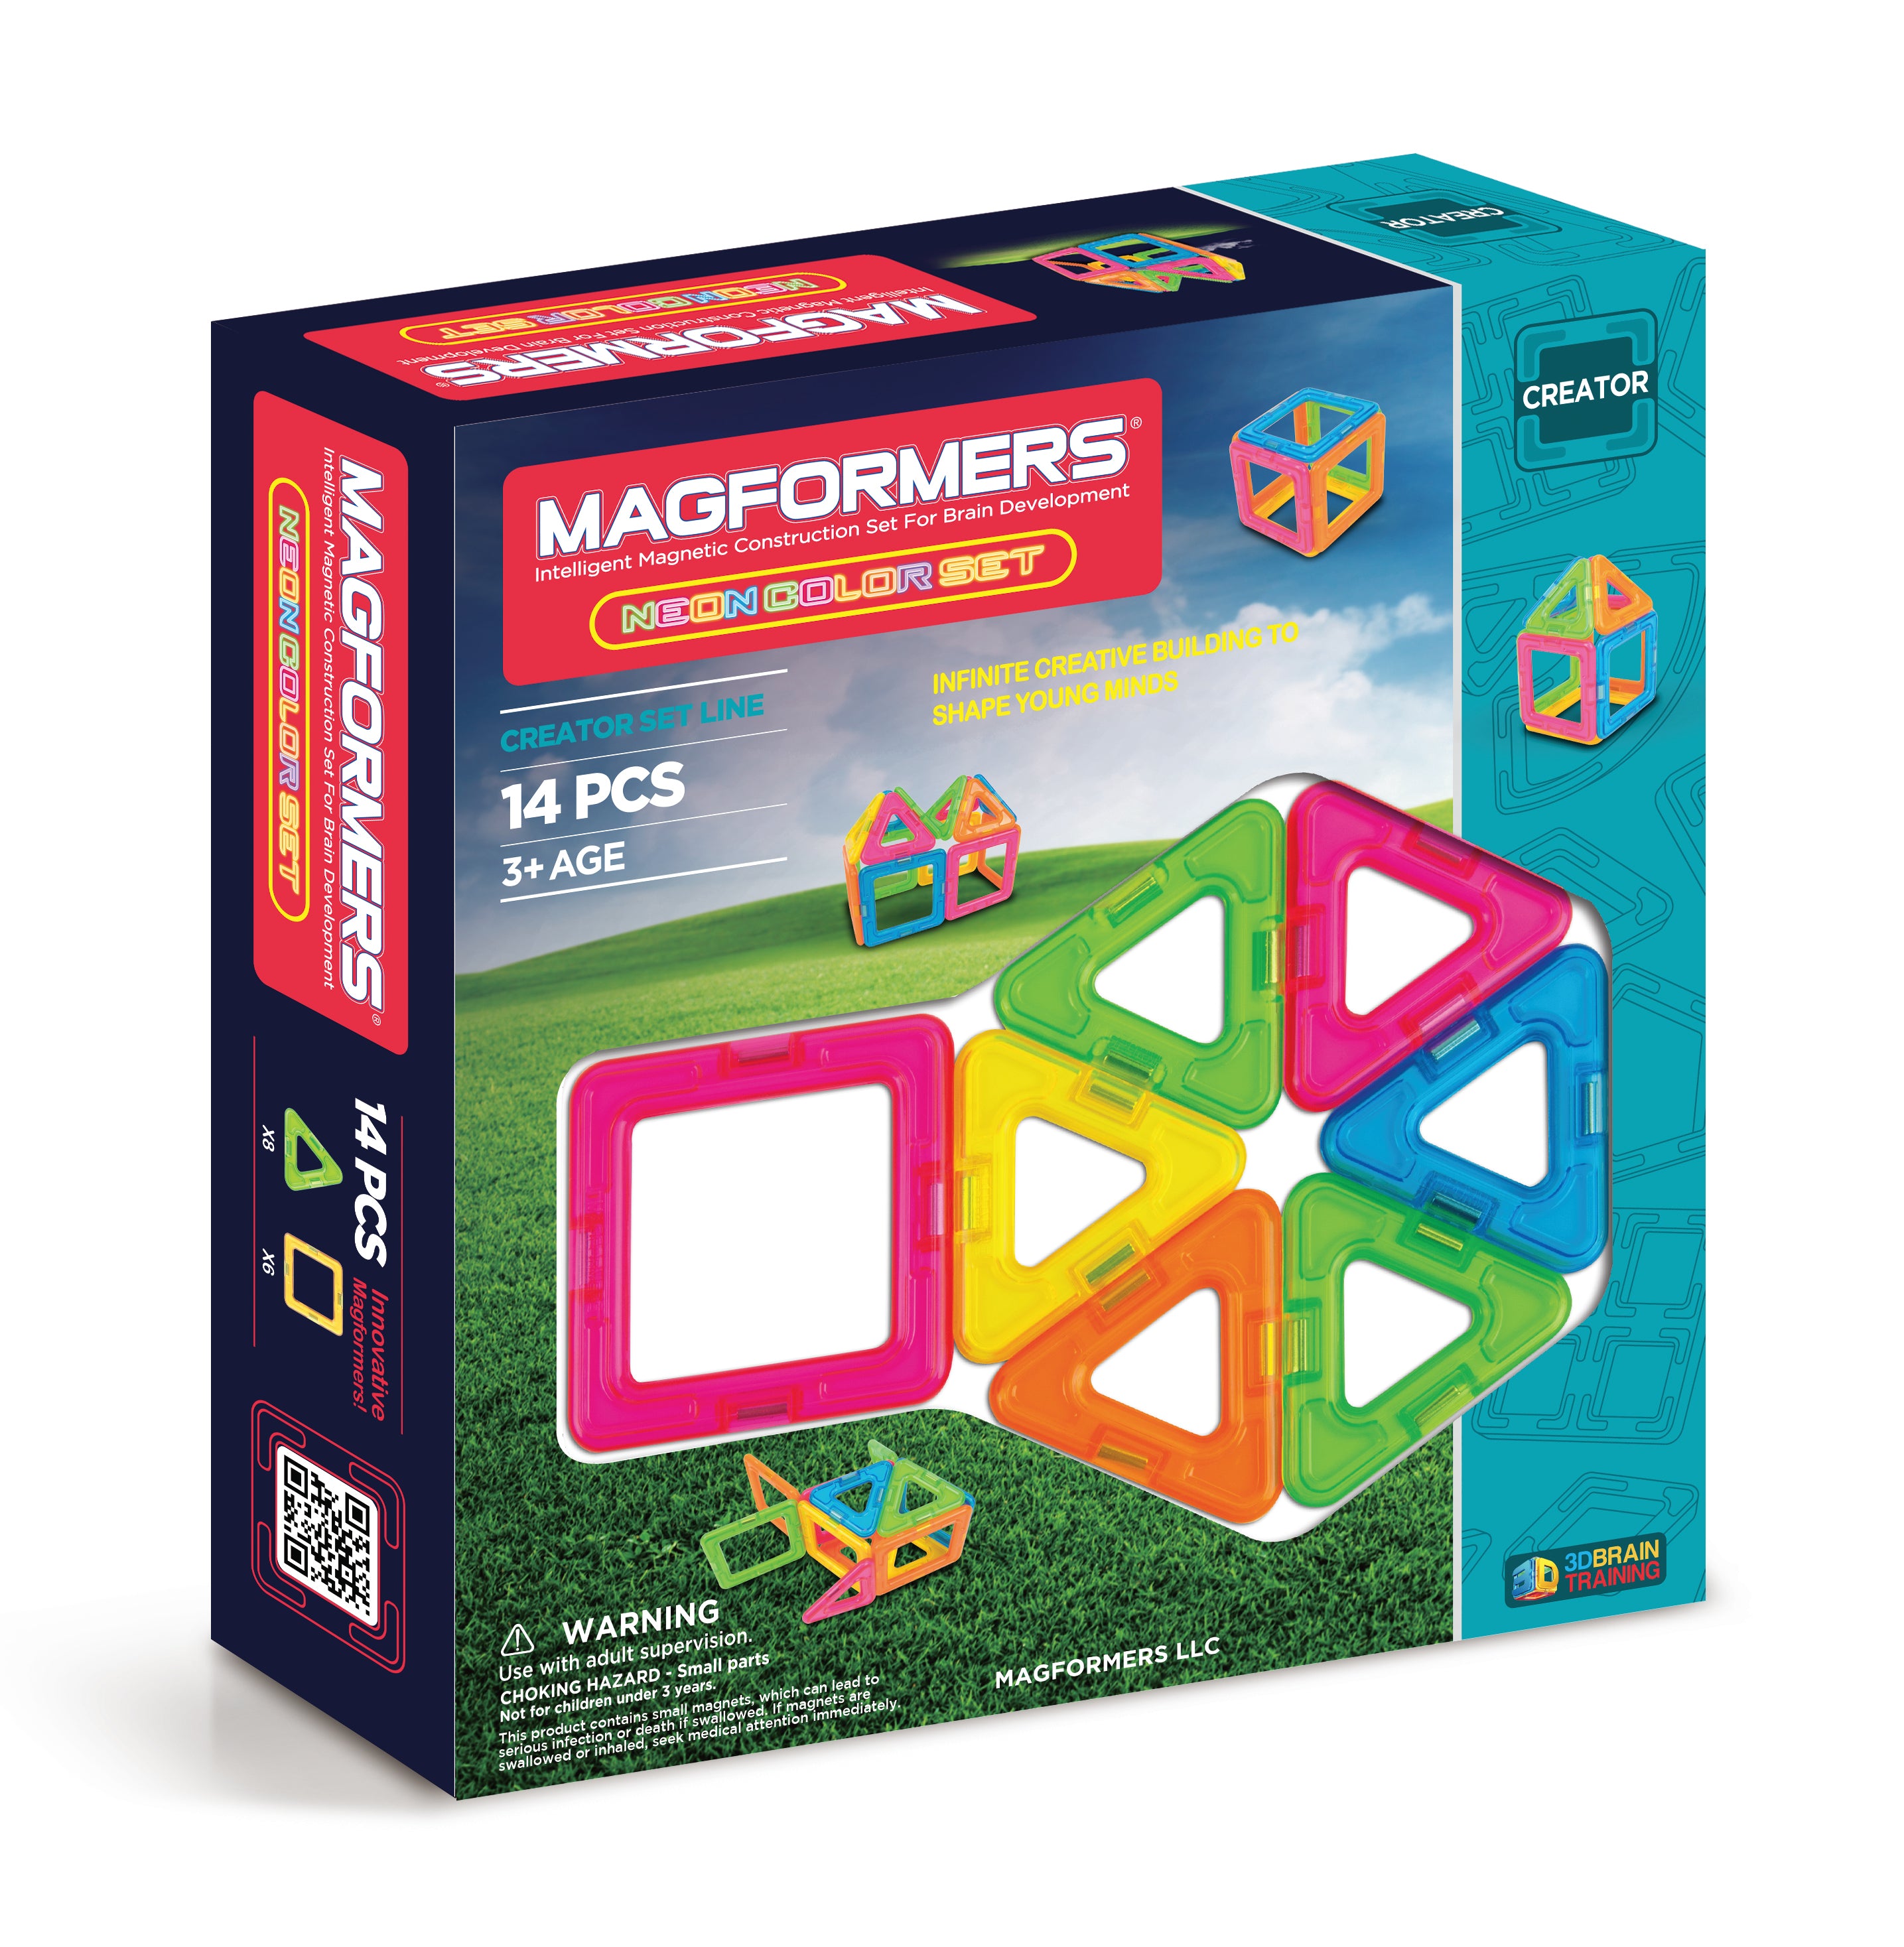 Magformers Neon 14Pc Construction – STEM US Toy Magformers Educational Magnetic